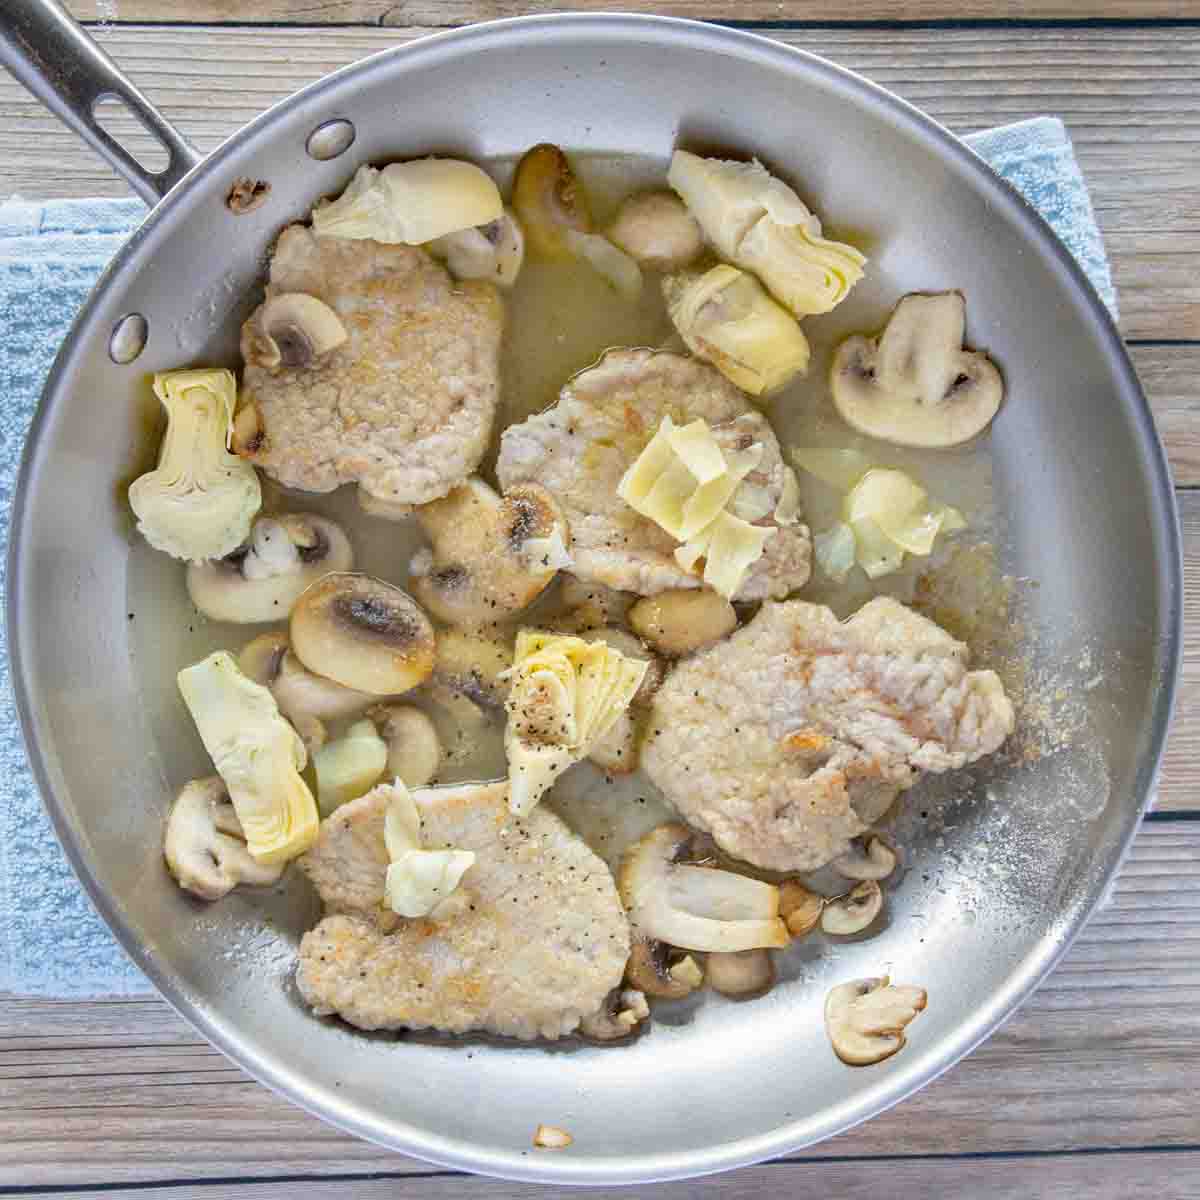 cooked medallions with mushrooms and artichokes in a frying pan.